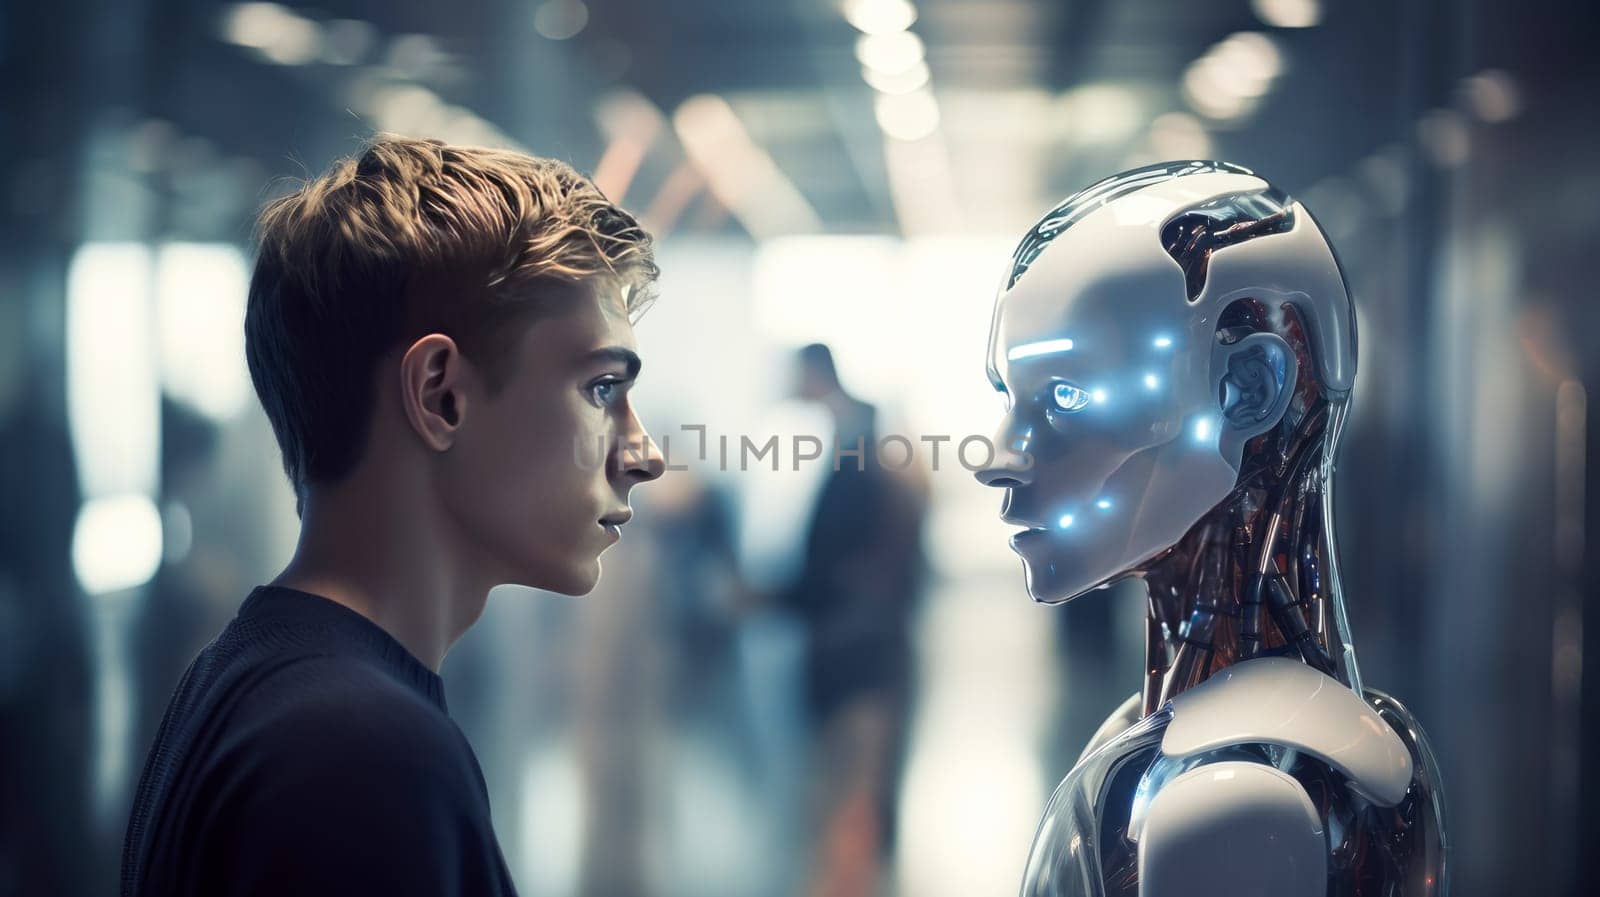 Robot cyborg and man talk and communicate with artificial intelligence, future technology. Internet and digital technologies. Global network. Integrating technology and human interaction. Chat bot. Digital technologies of the future